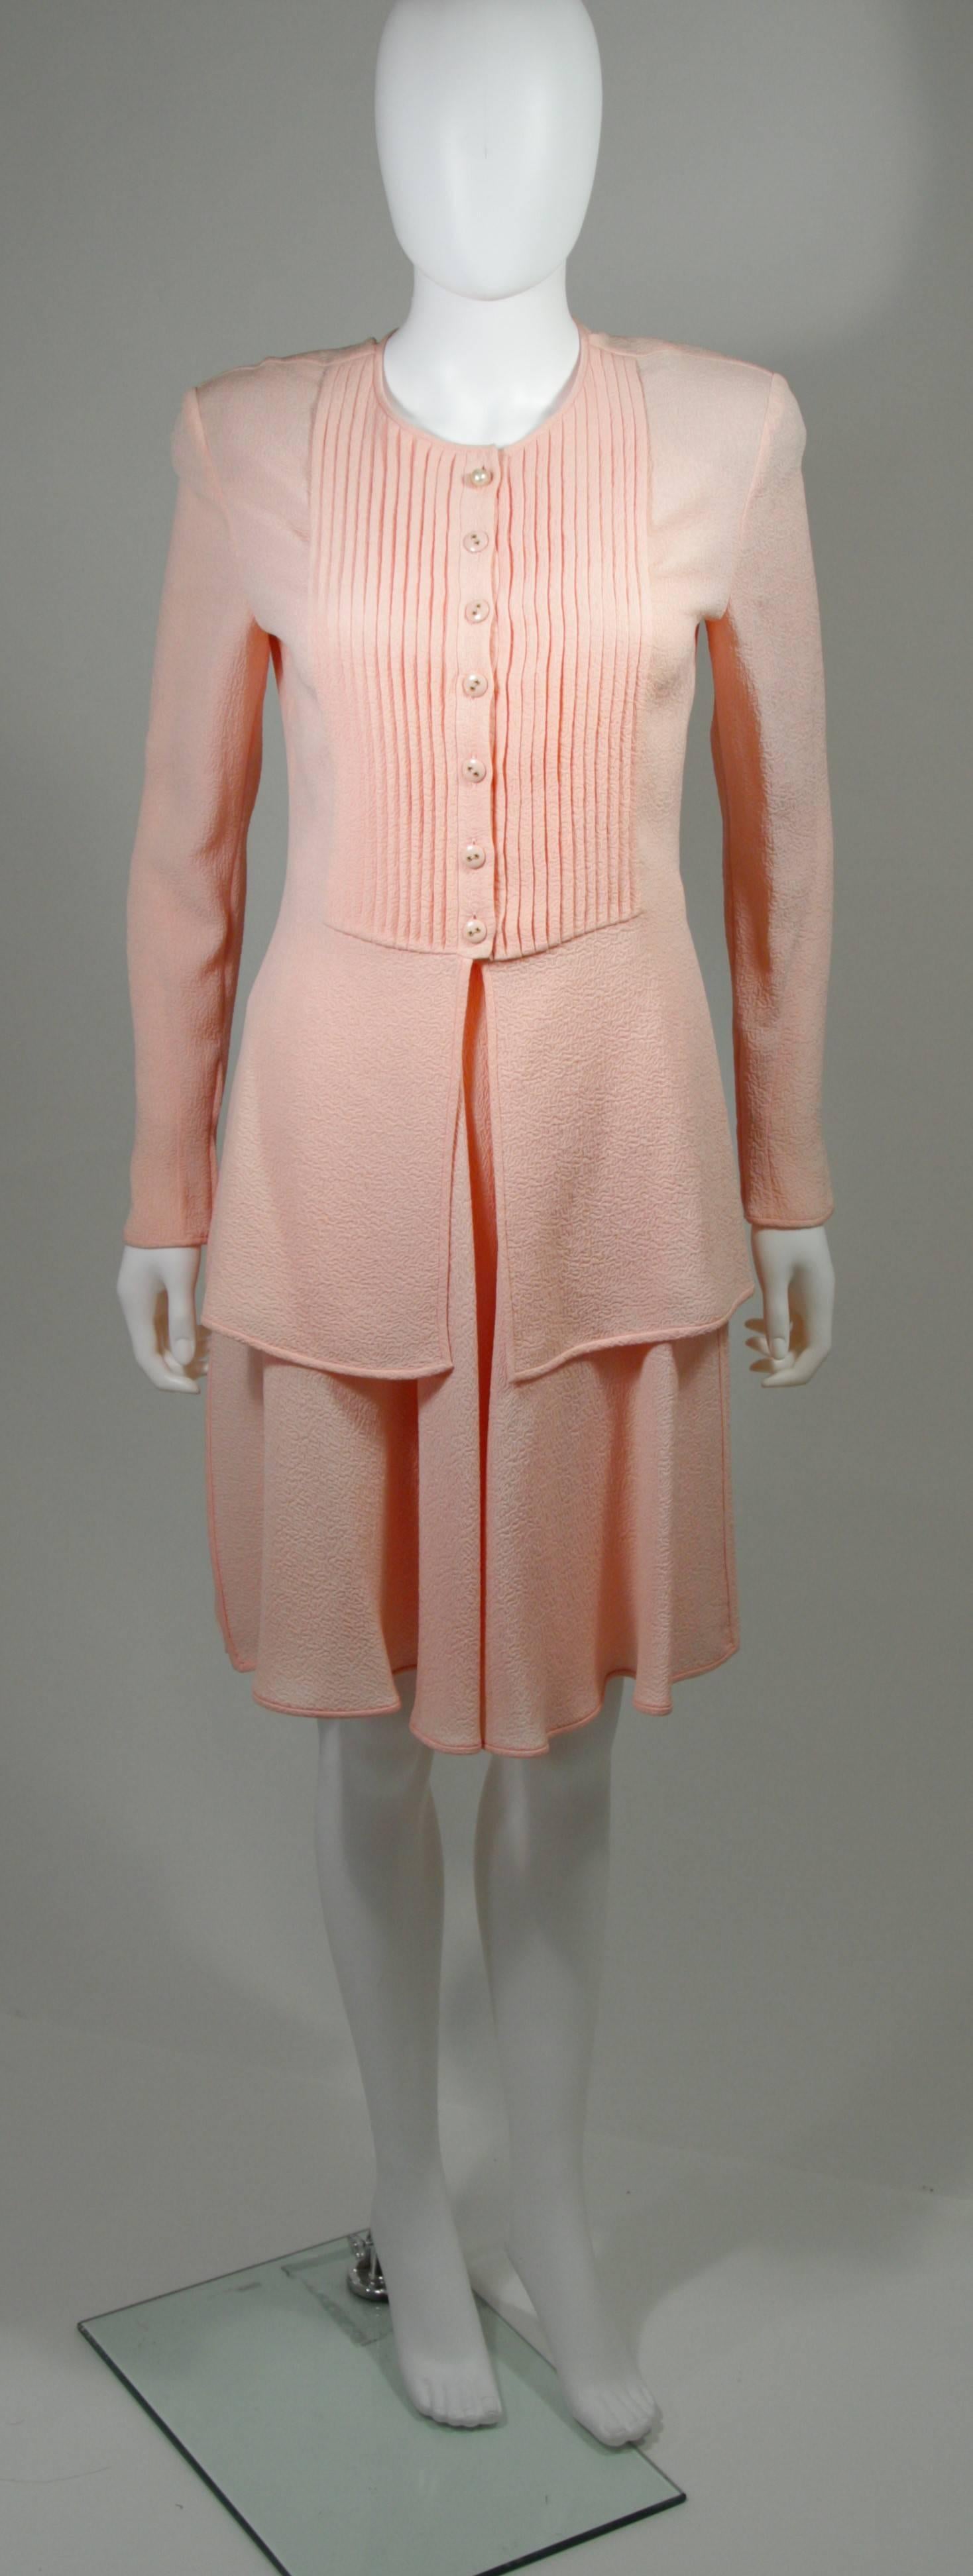 This Valentino skirt set is composed of a pink silk. The blouse features a pleated front with buttons and zippers at the sleeves. The skirt features a large pleat style with side zipper closure. There are shoulder pads. In excellent condition. Made